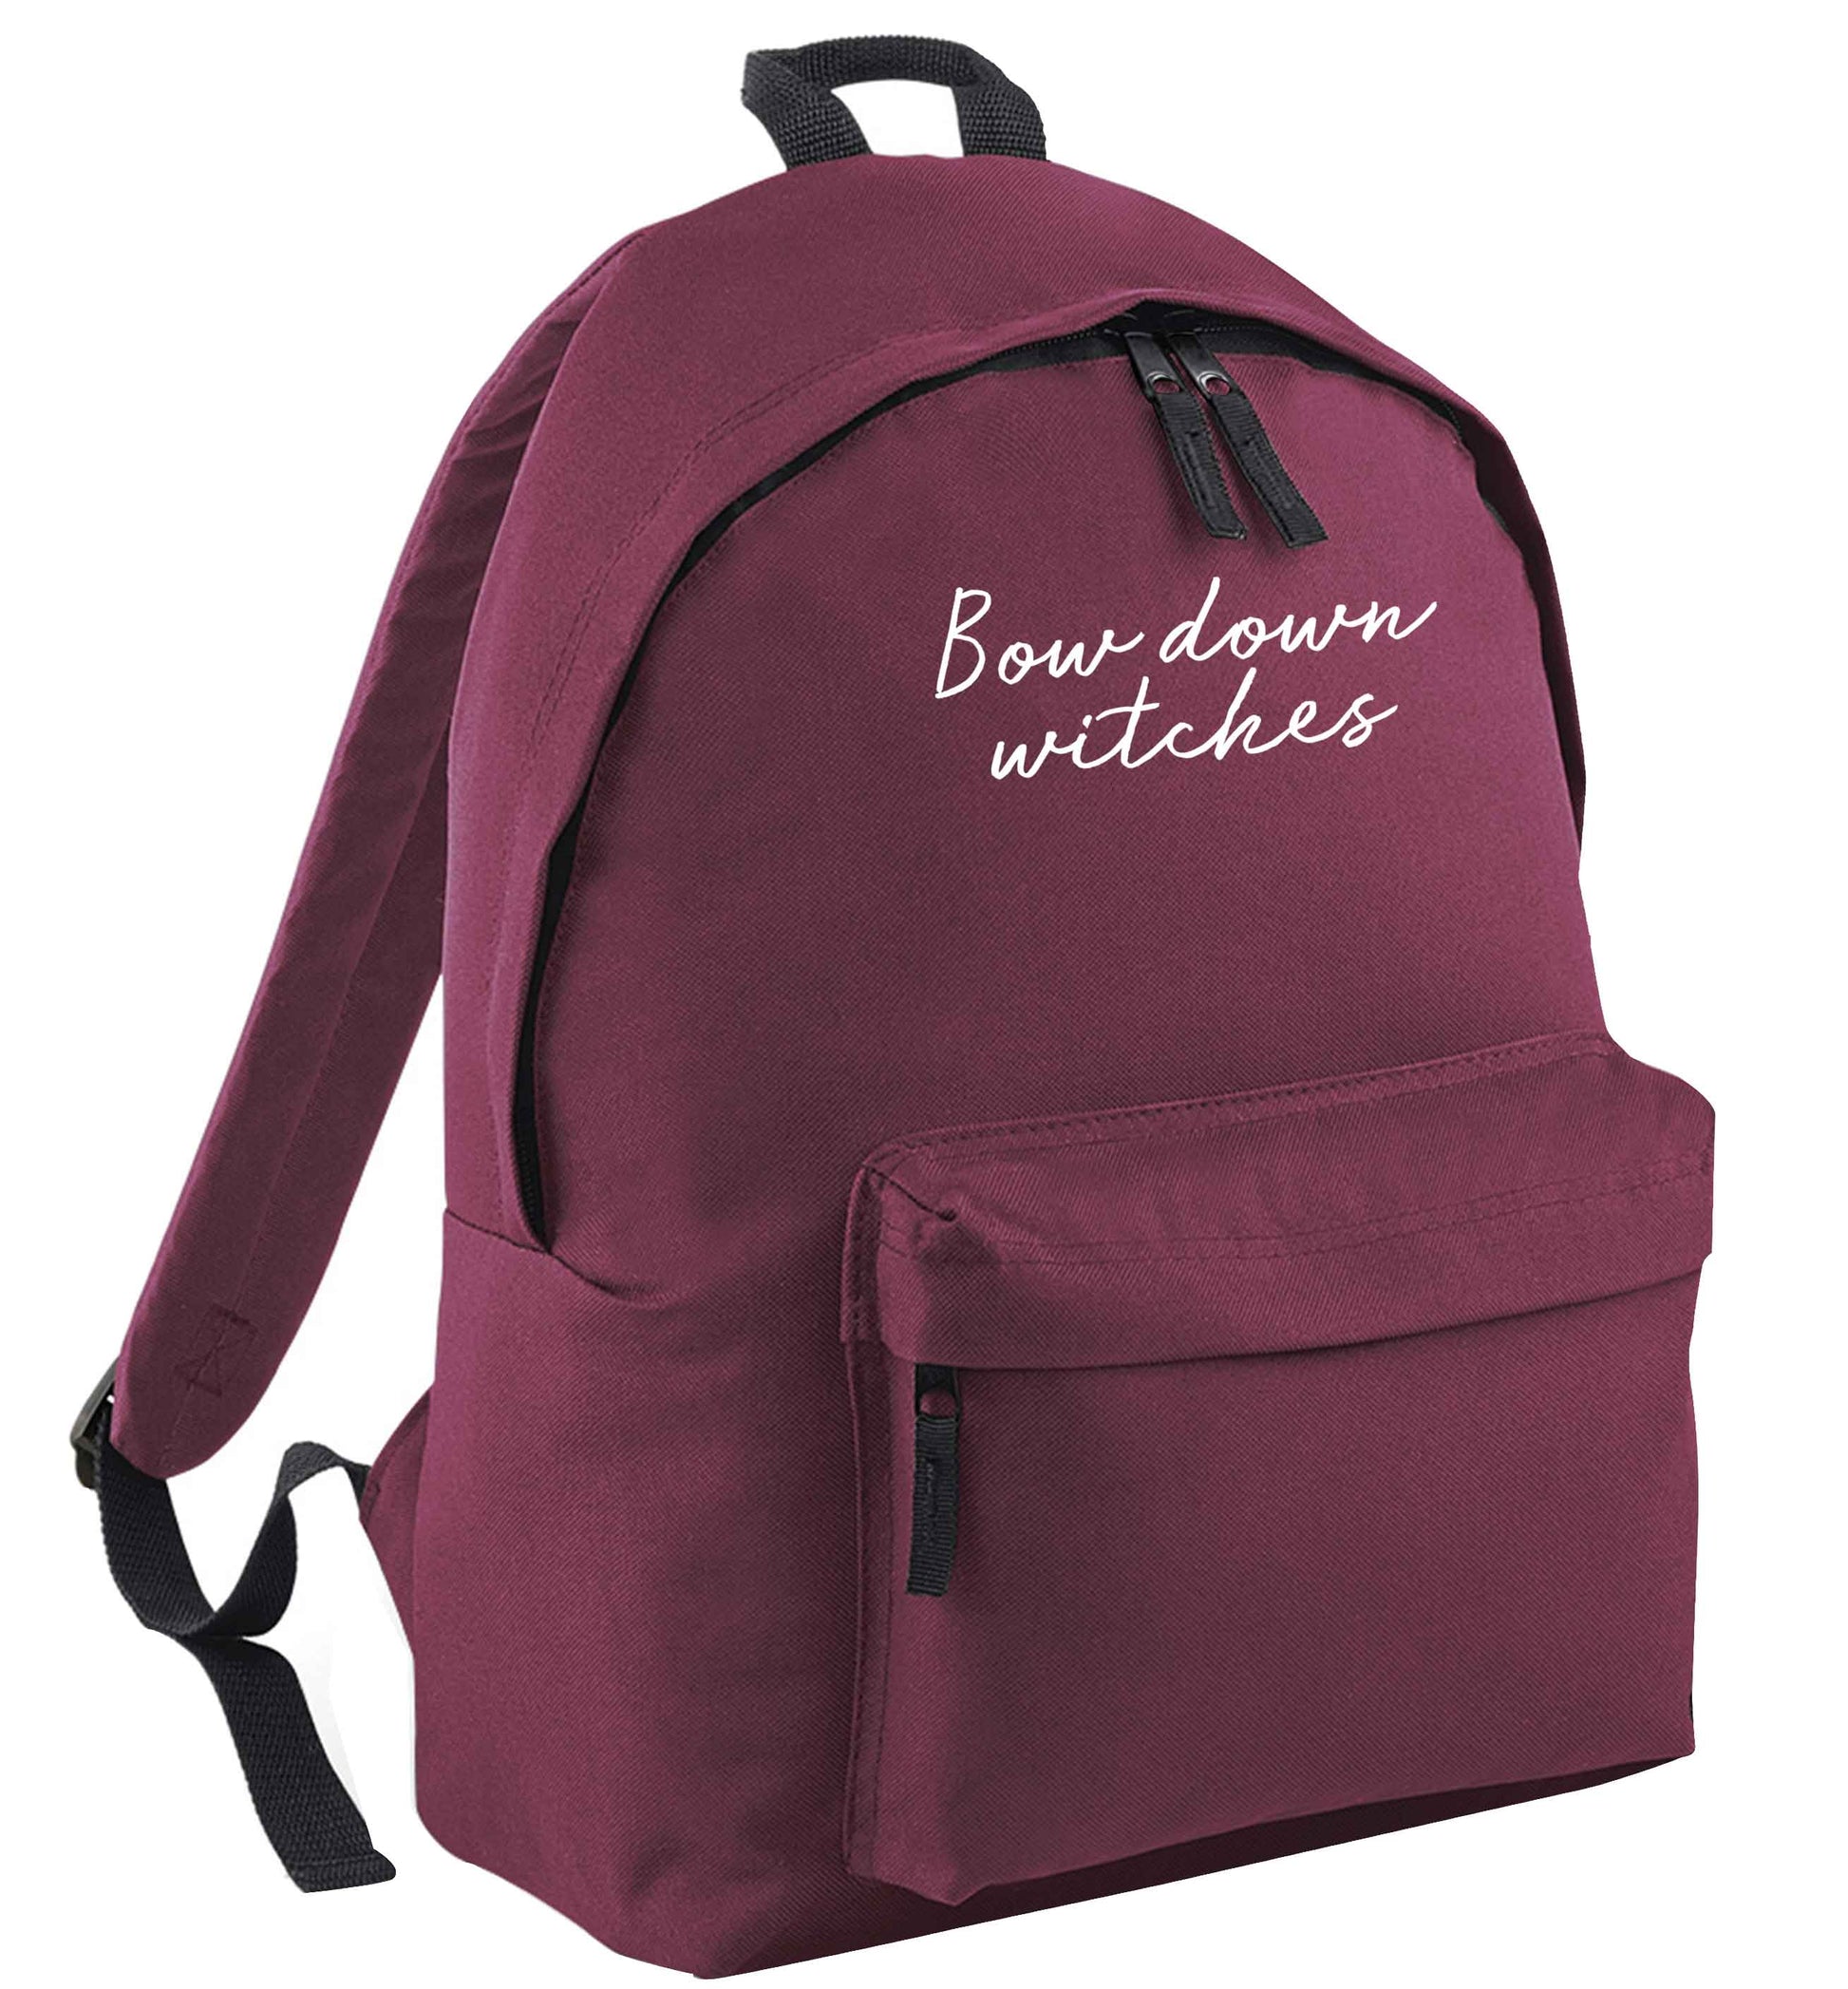 Bow down witches | Children's backpack